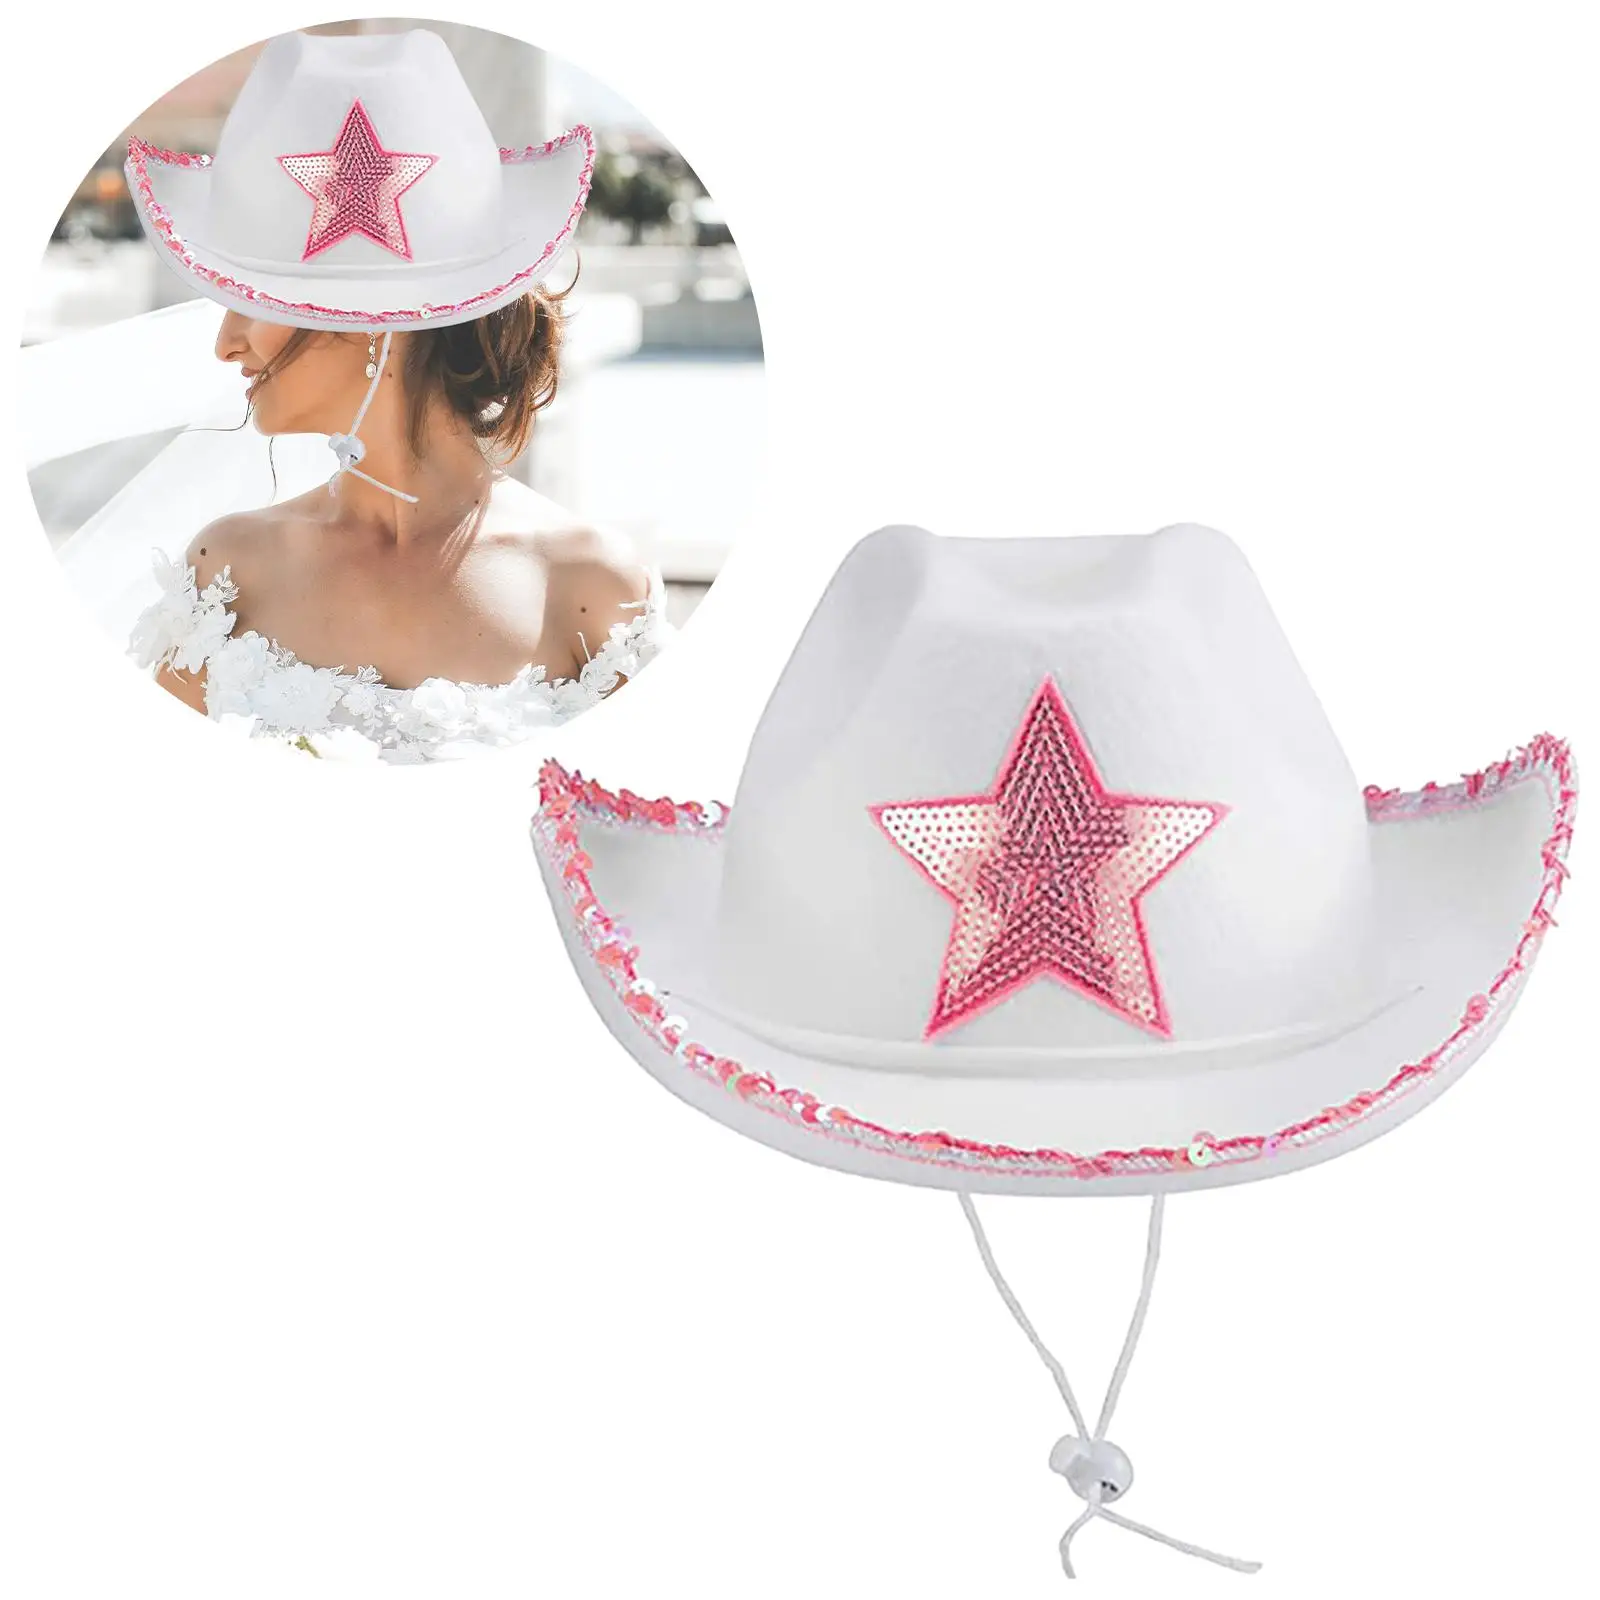 Novelty  Hat with Tiara Adjustable Neck Draw String White Felt Western Cowboy Hat for Women Ladies Dress up Fancy Dress Party